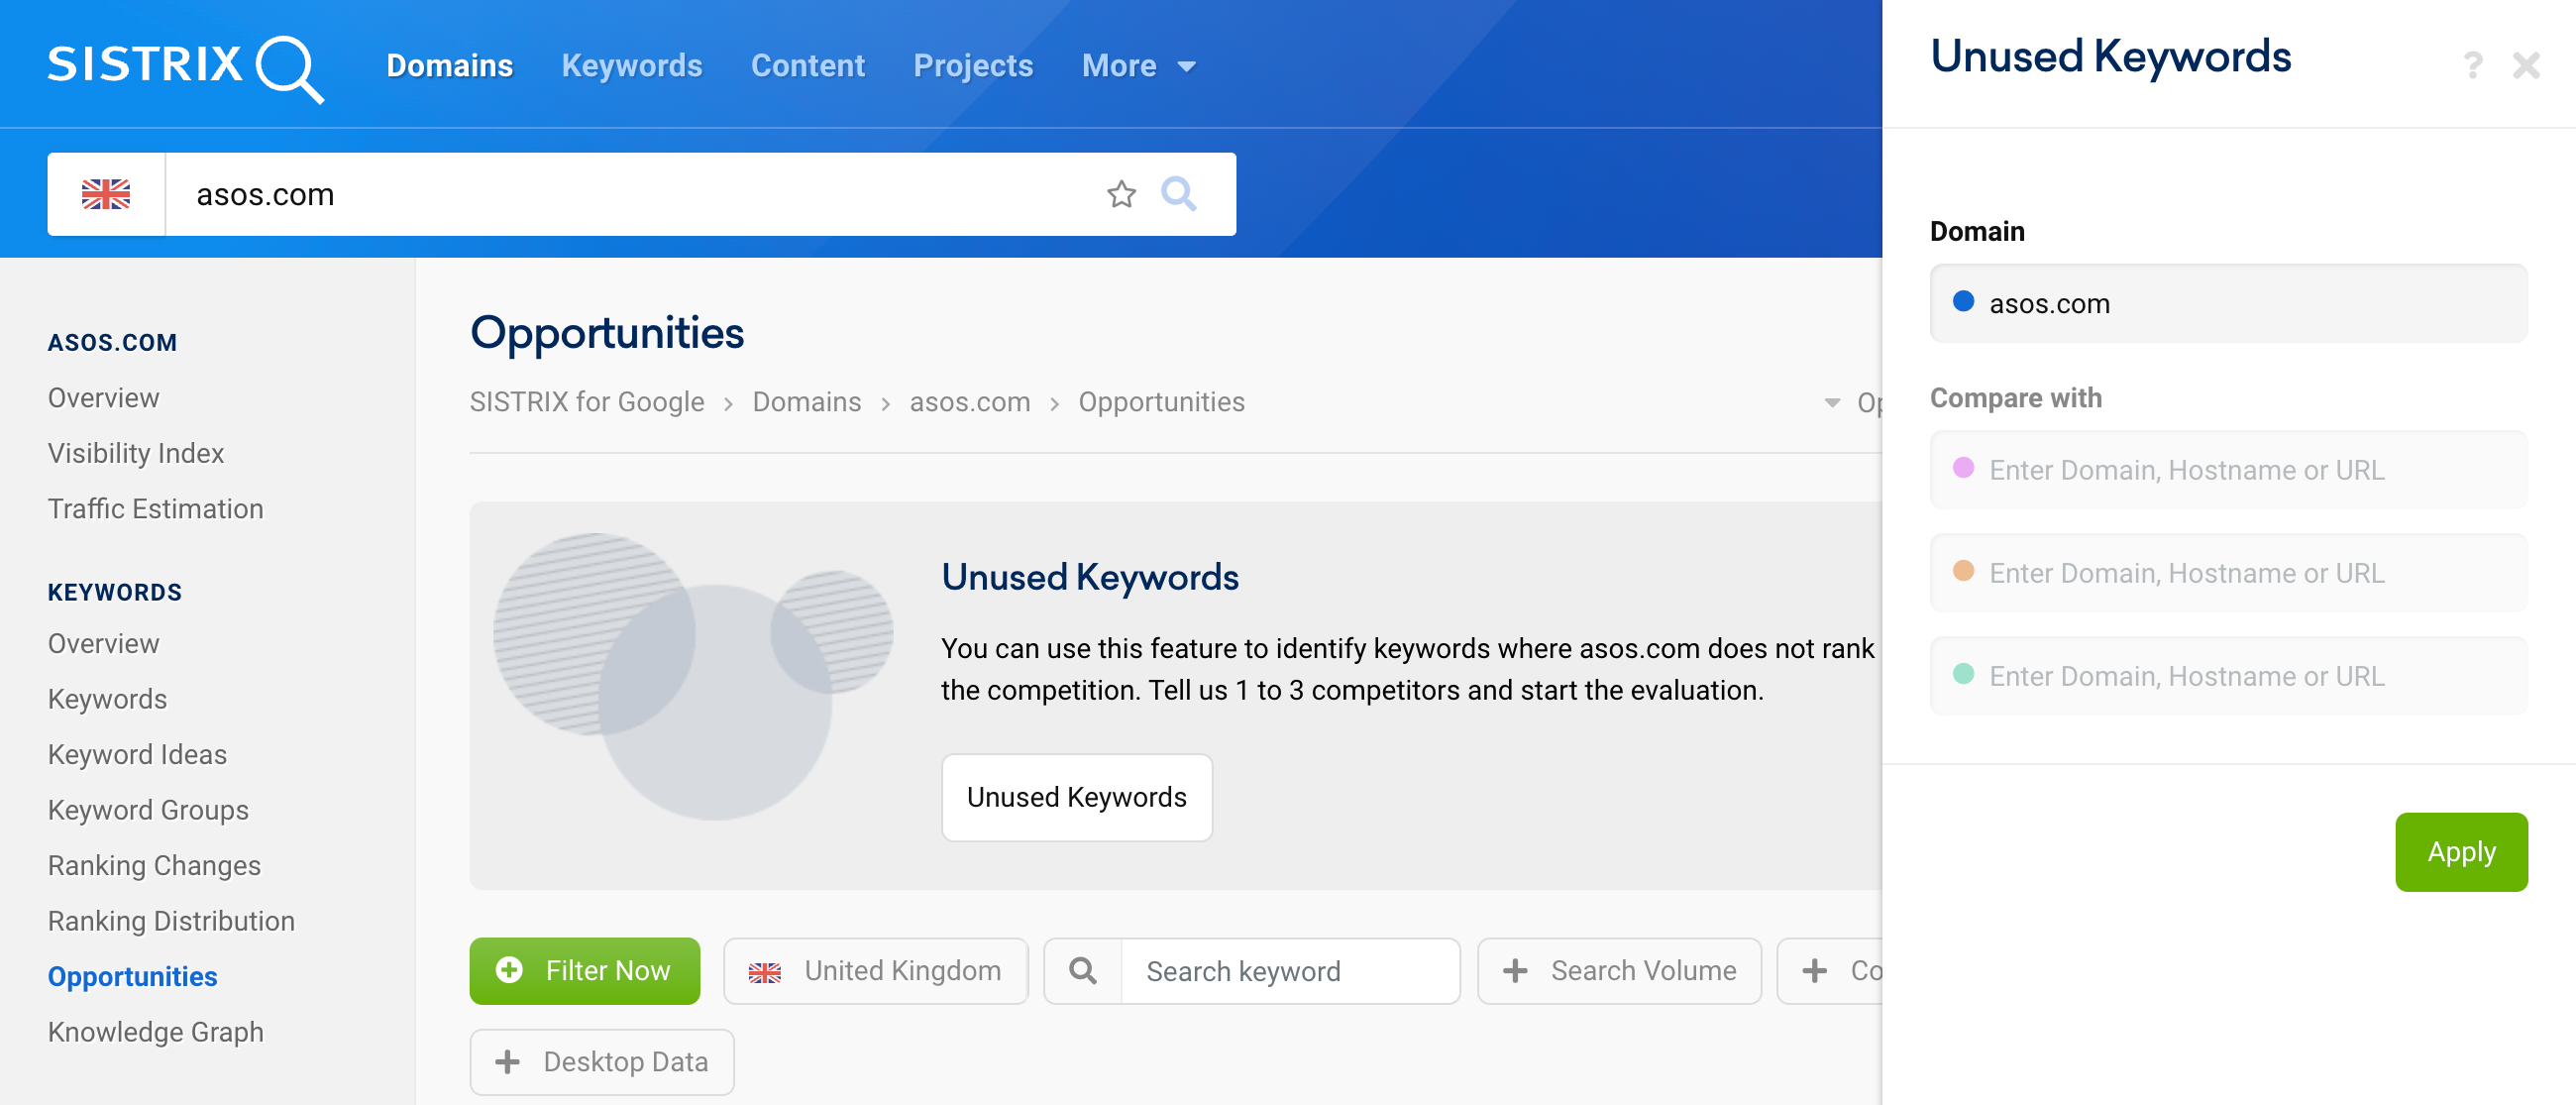 Selection for the "Unused Keywords" feature. Up to 3 competitor domains can be entered here.